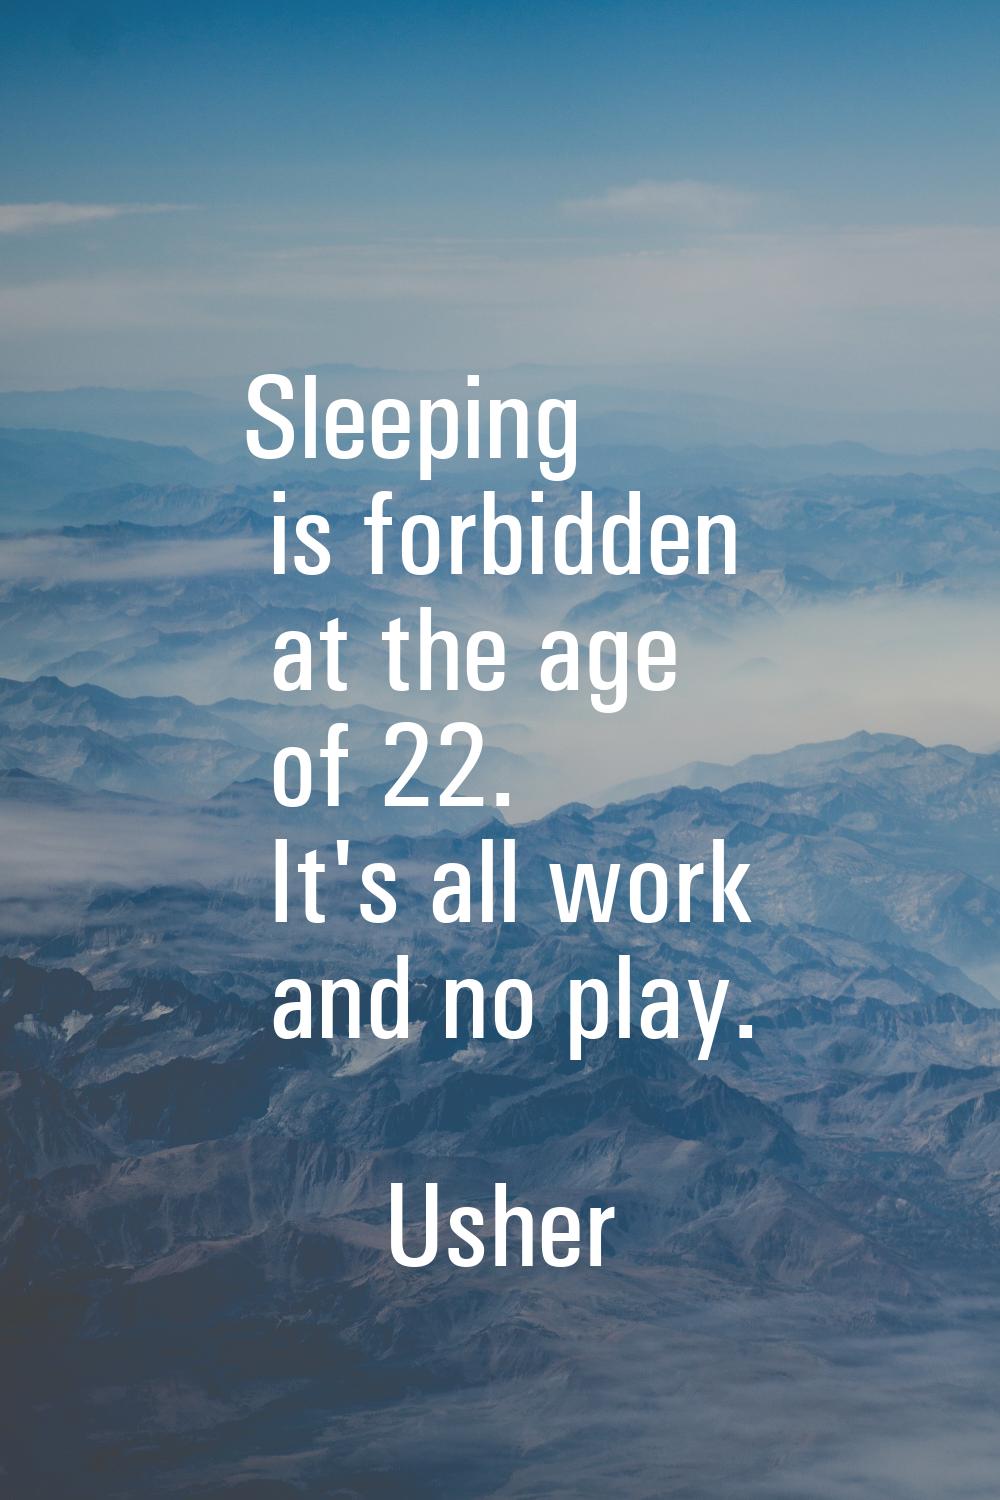 Sleeping is forbidden at the age of 22. It's all work and no play.